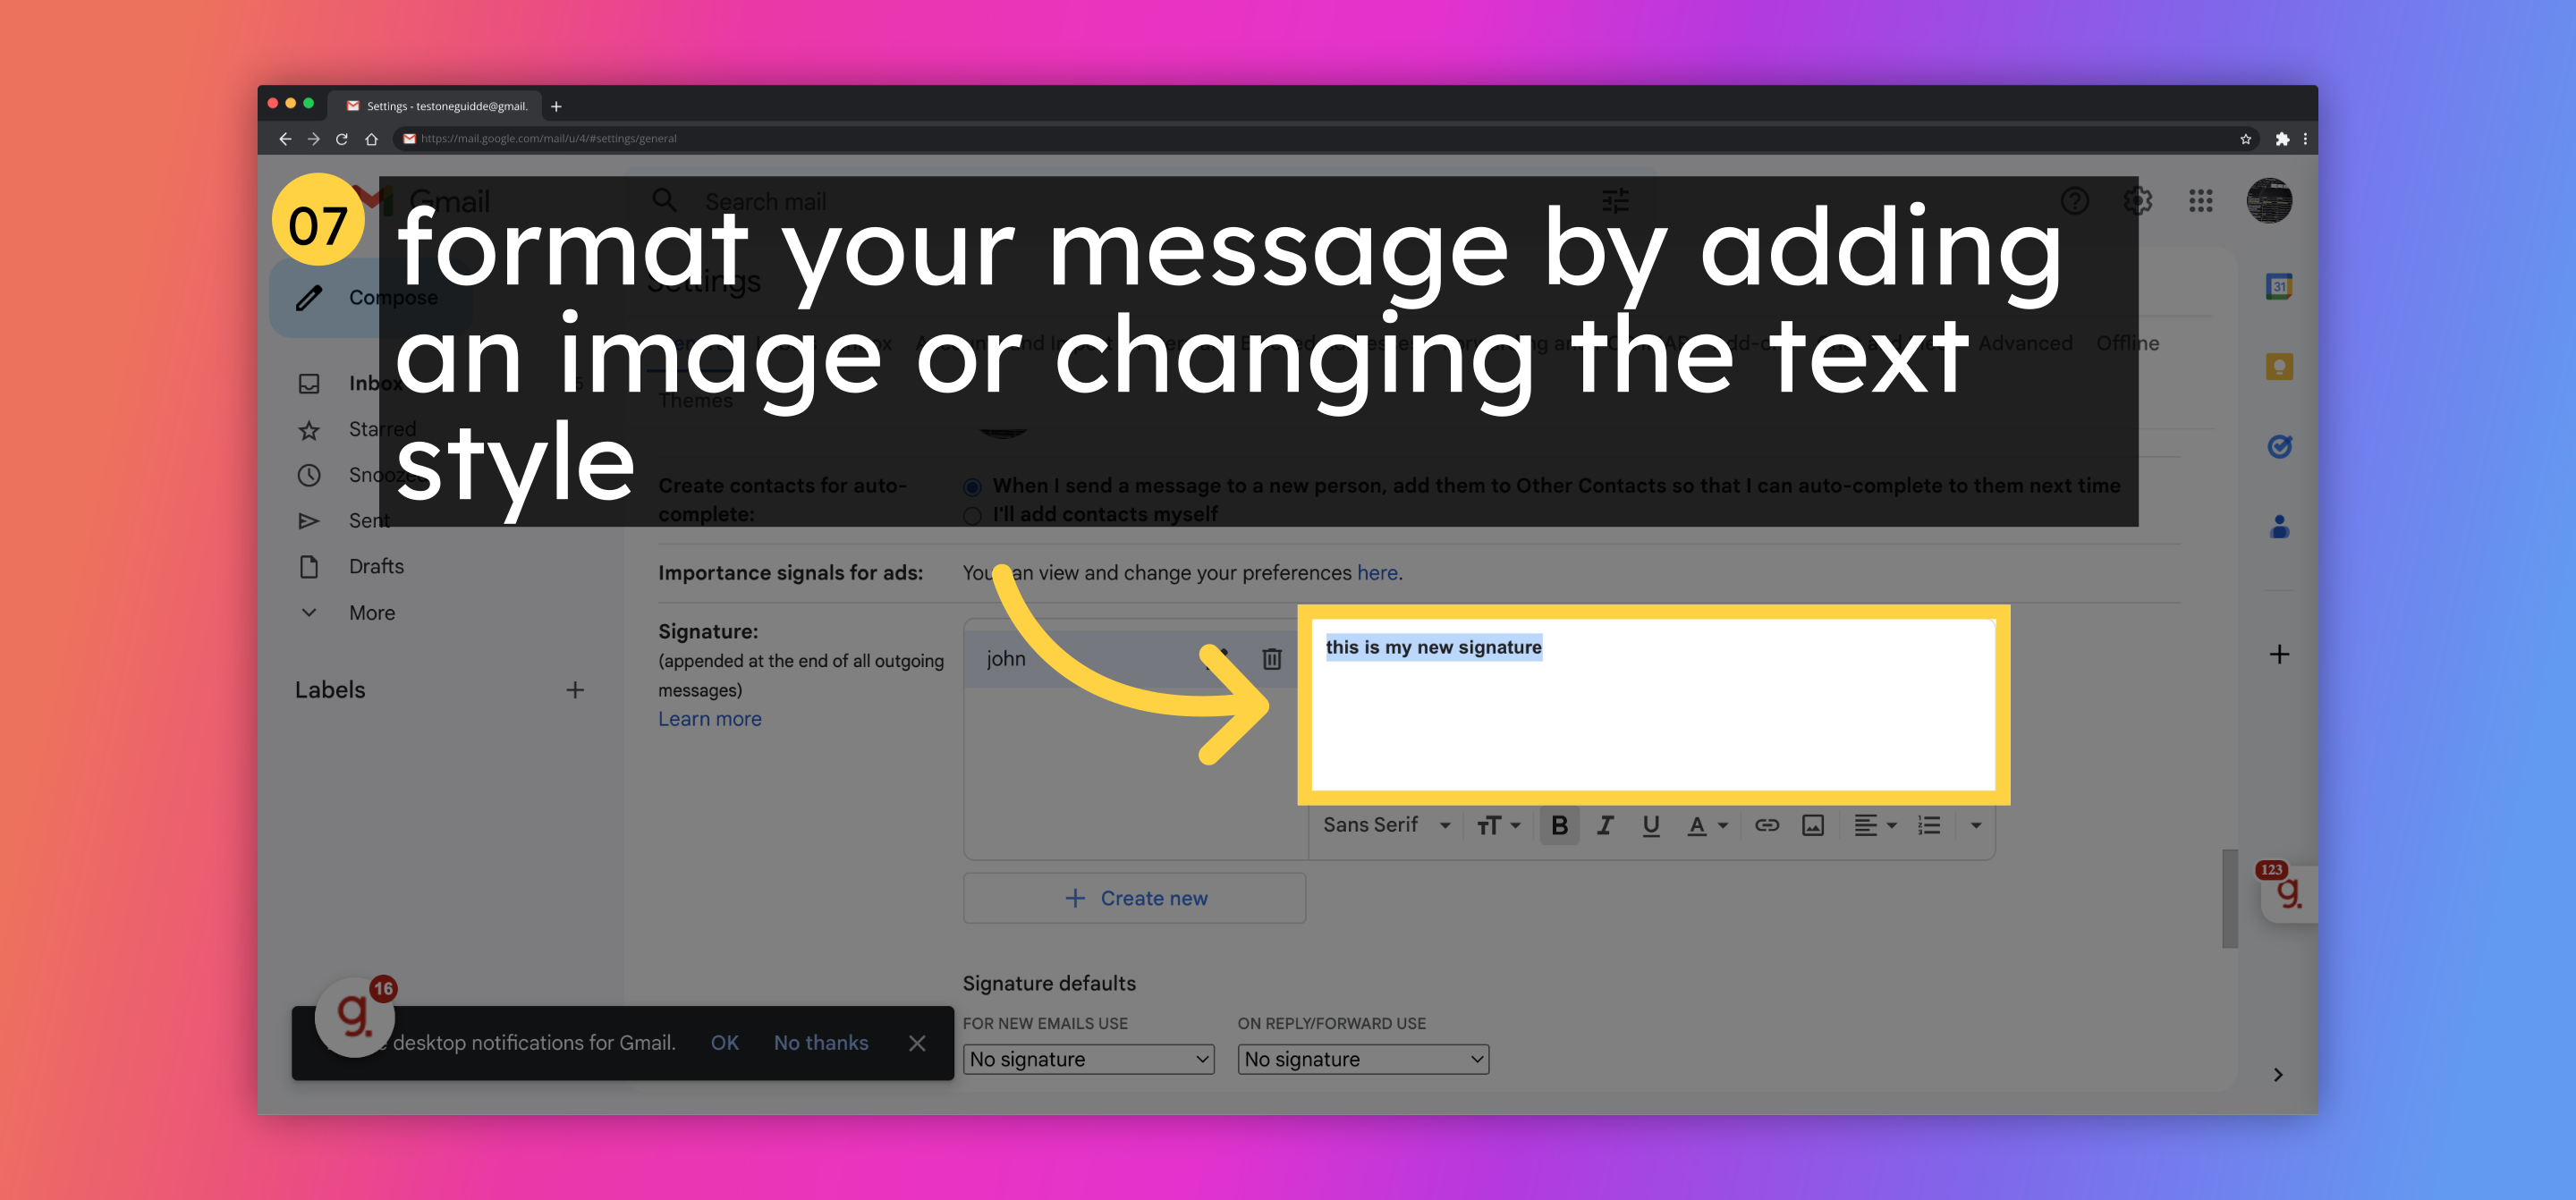 format your message by adding an image or changing the text style